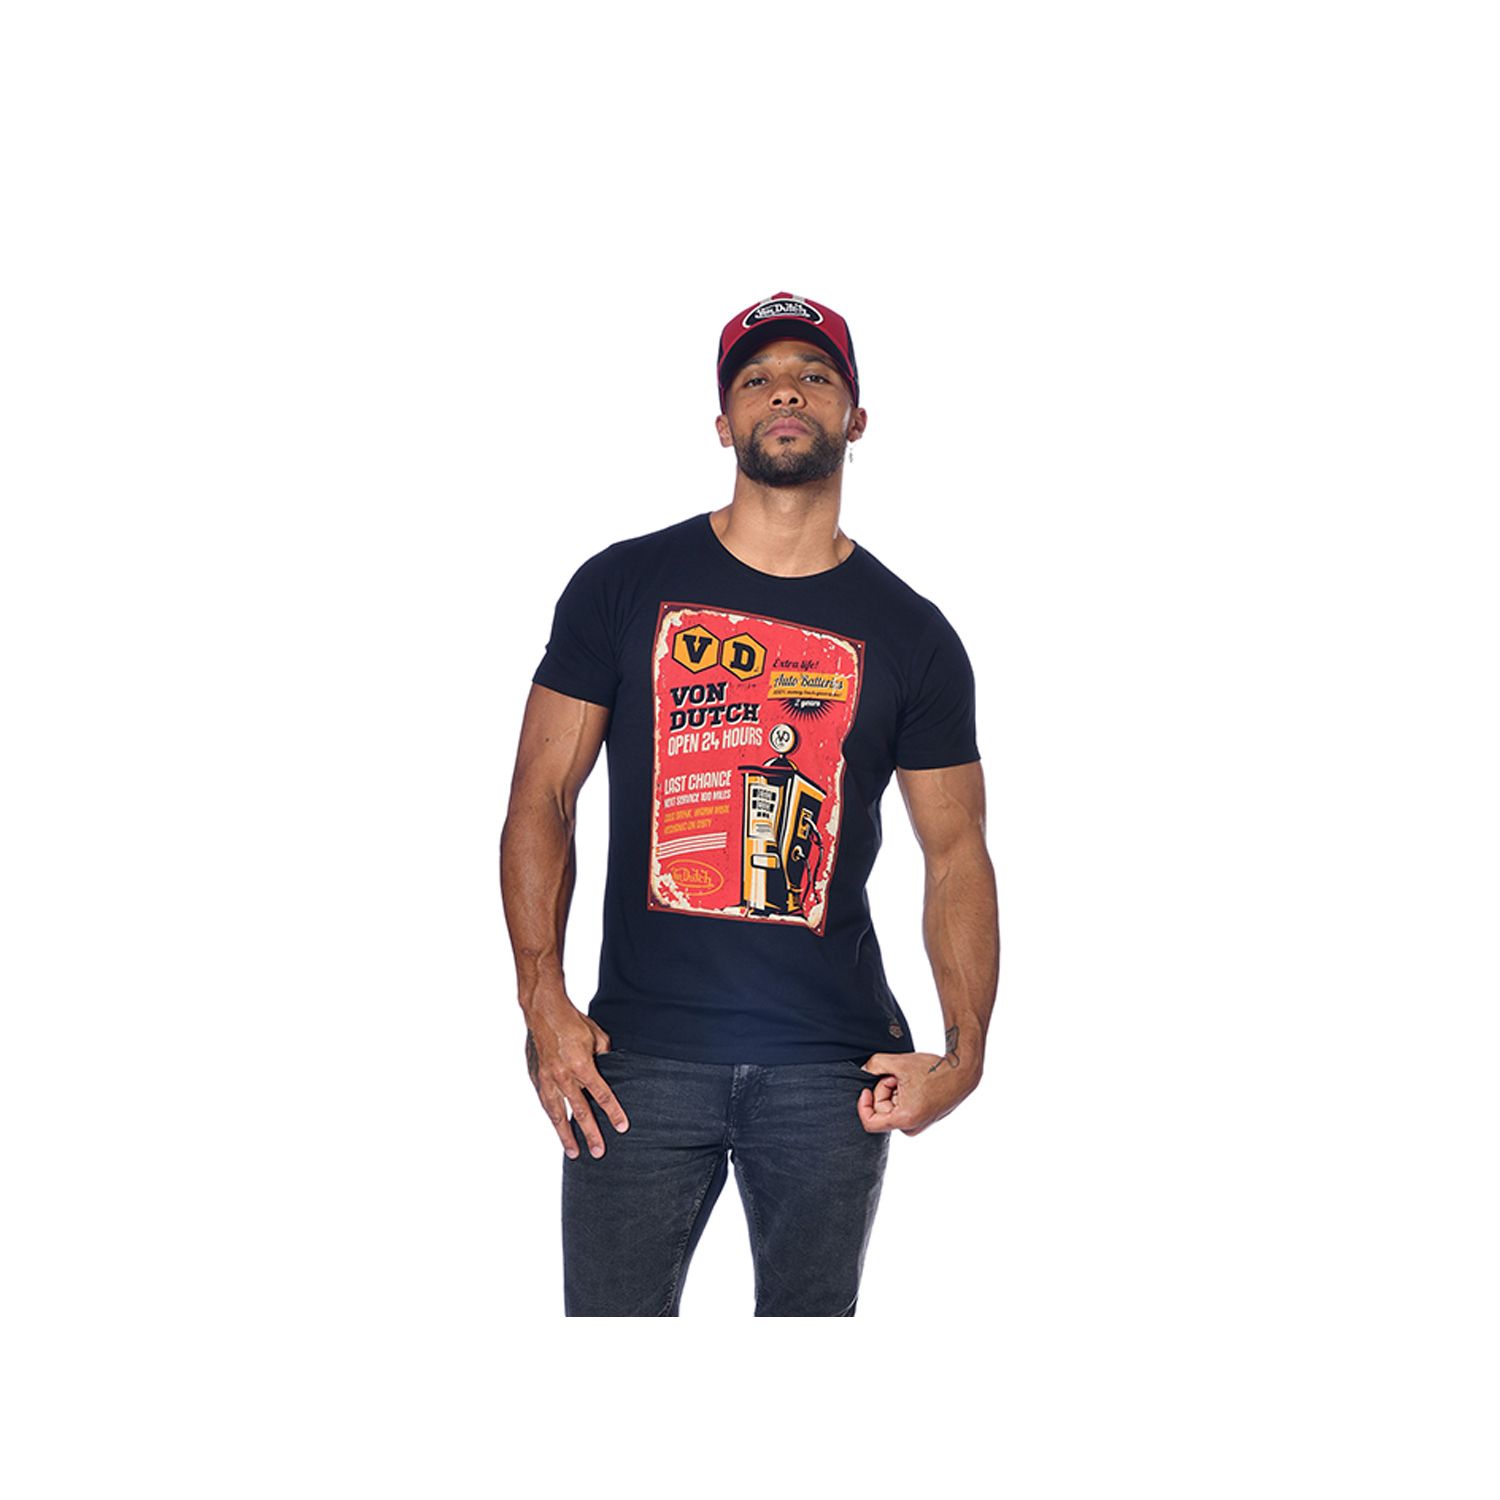 T-shirt col rond homme Stat